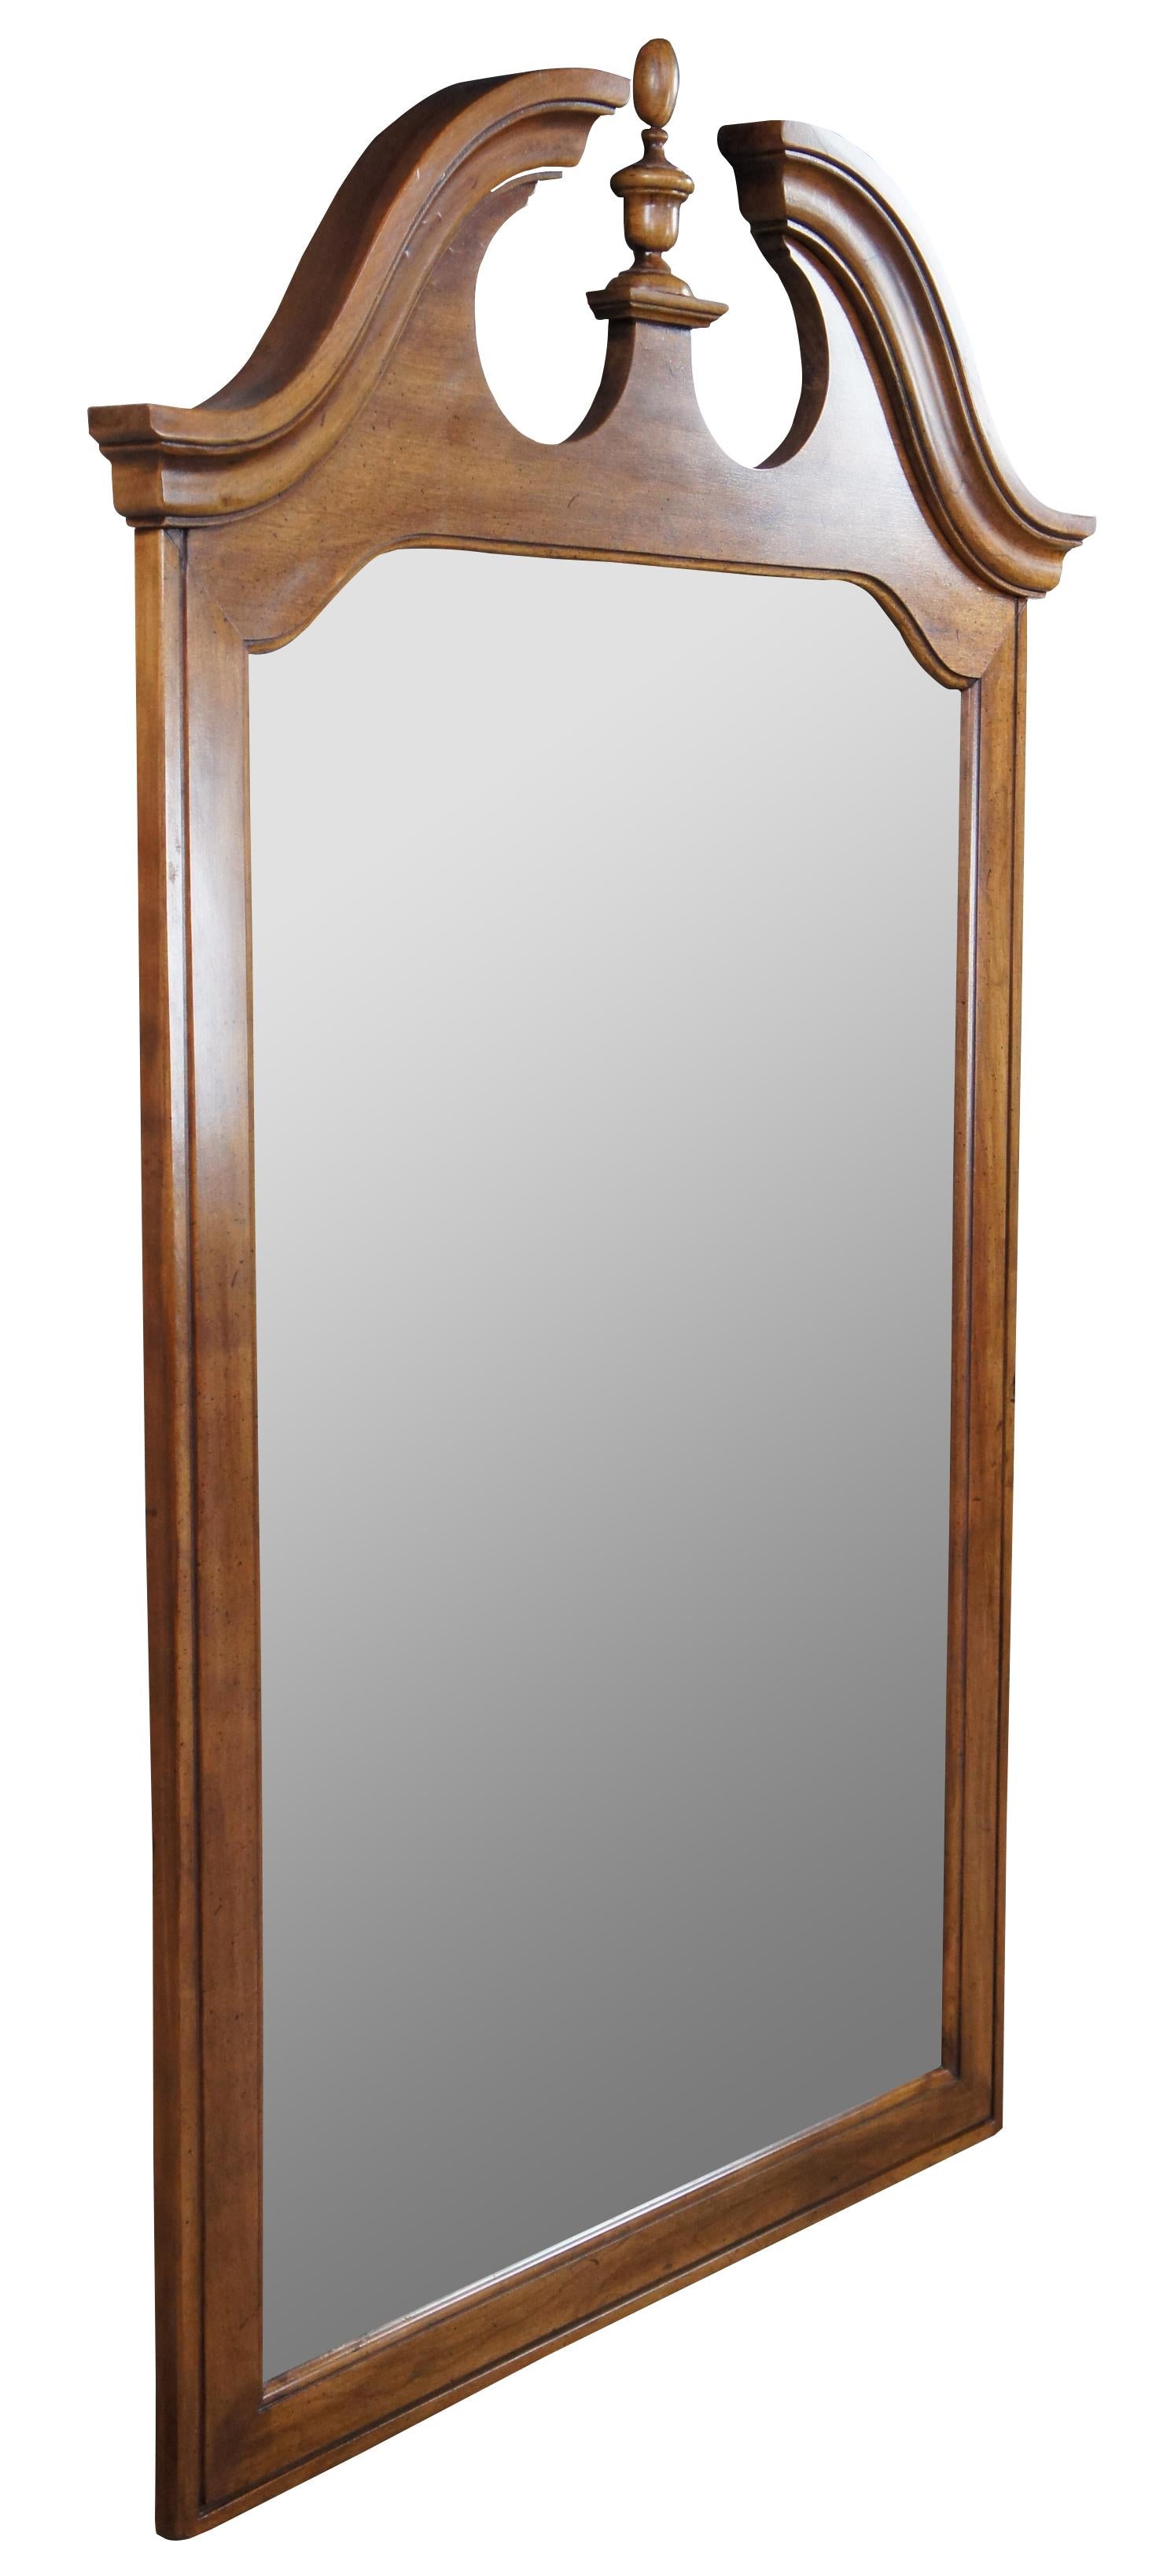 Thomasville Collectors Cherry Georgian style mirror, circa 1978. A tall cherry case with naturally distressed frame and open pediment. Number 10111-220, DR-02-9.
 